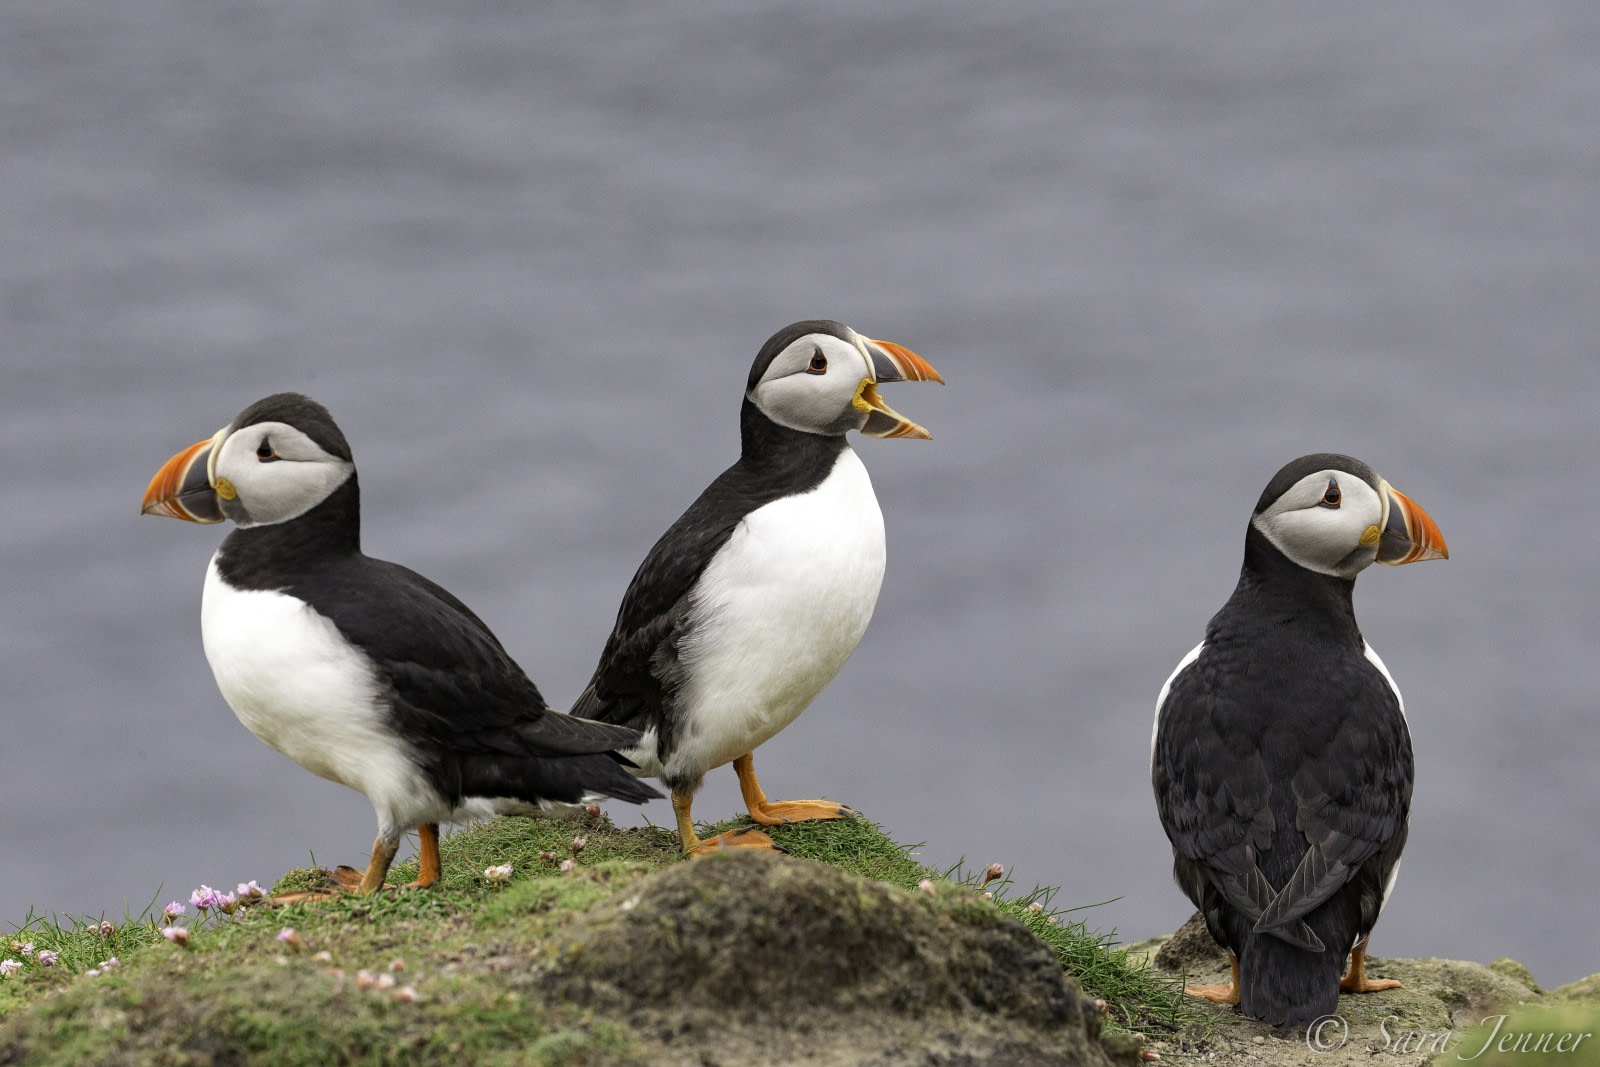 Atlantic puffin  Facts, pictures & more about Atlantic puffin